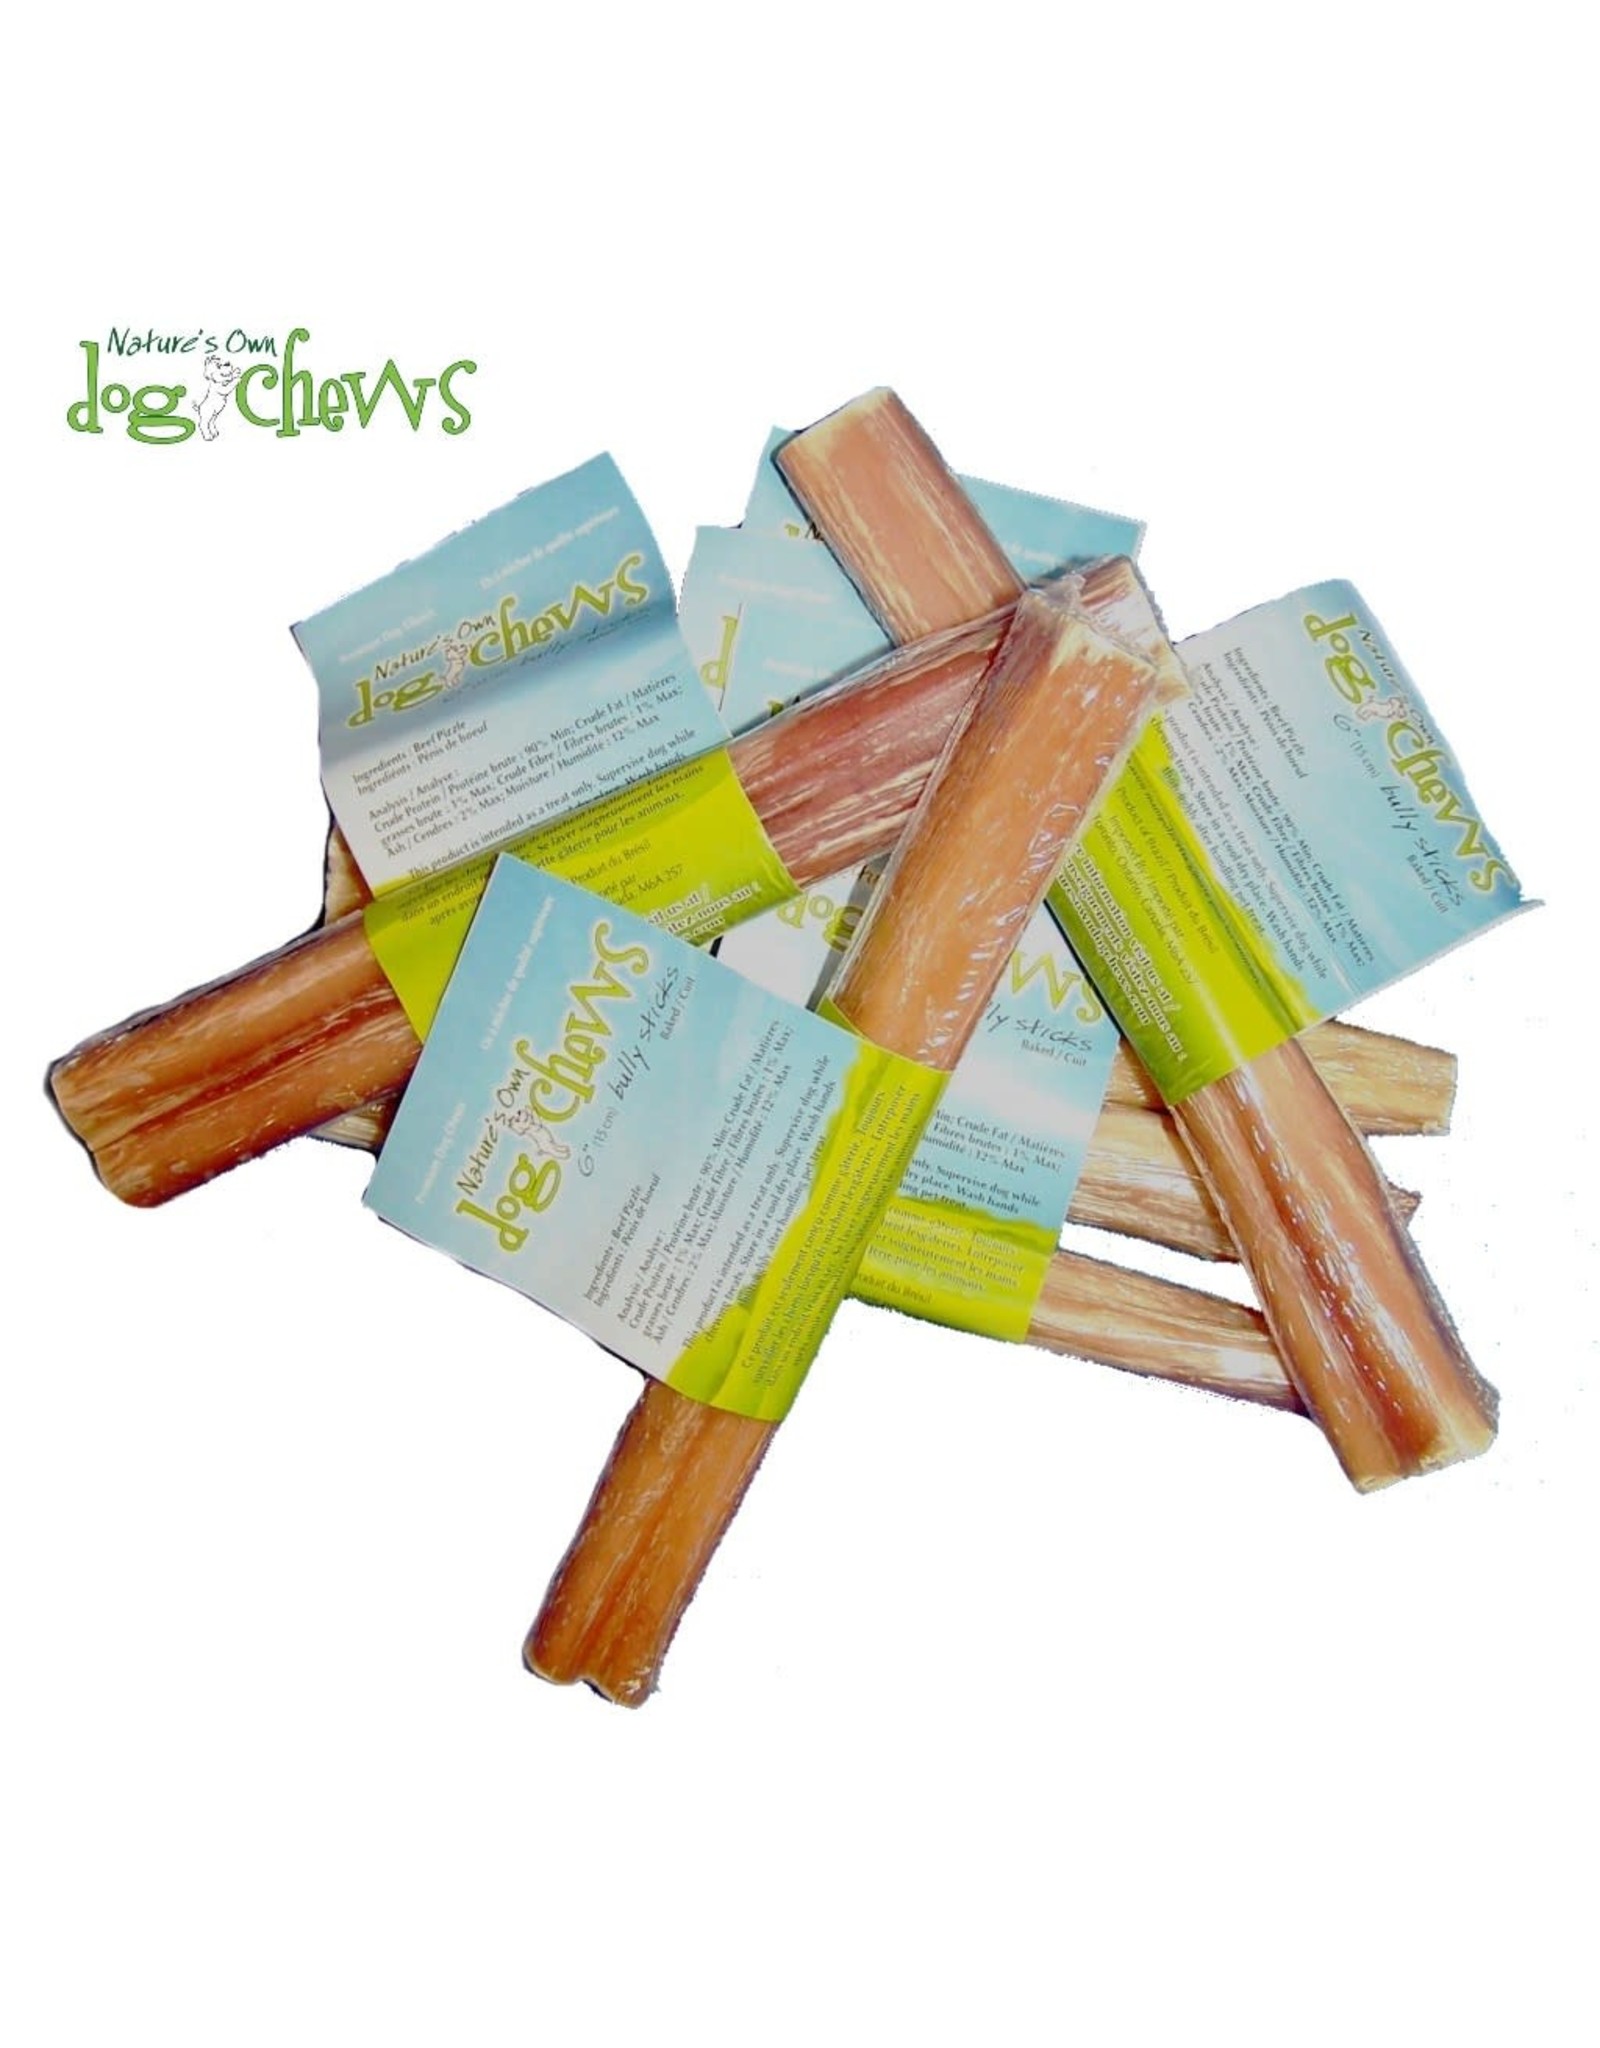 natures own dog chews Nature's Own bully stick Jumbo